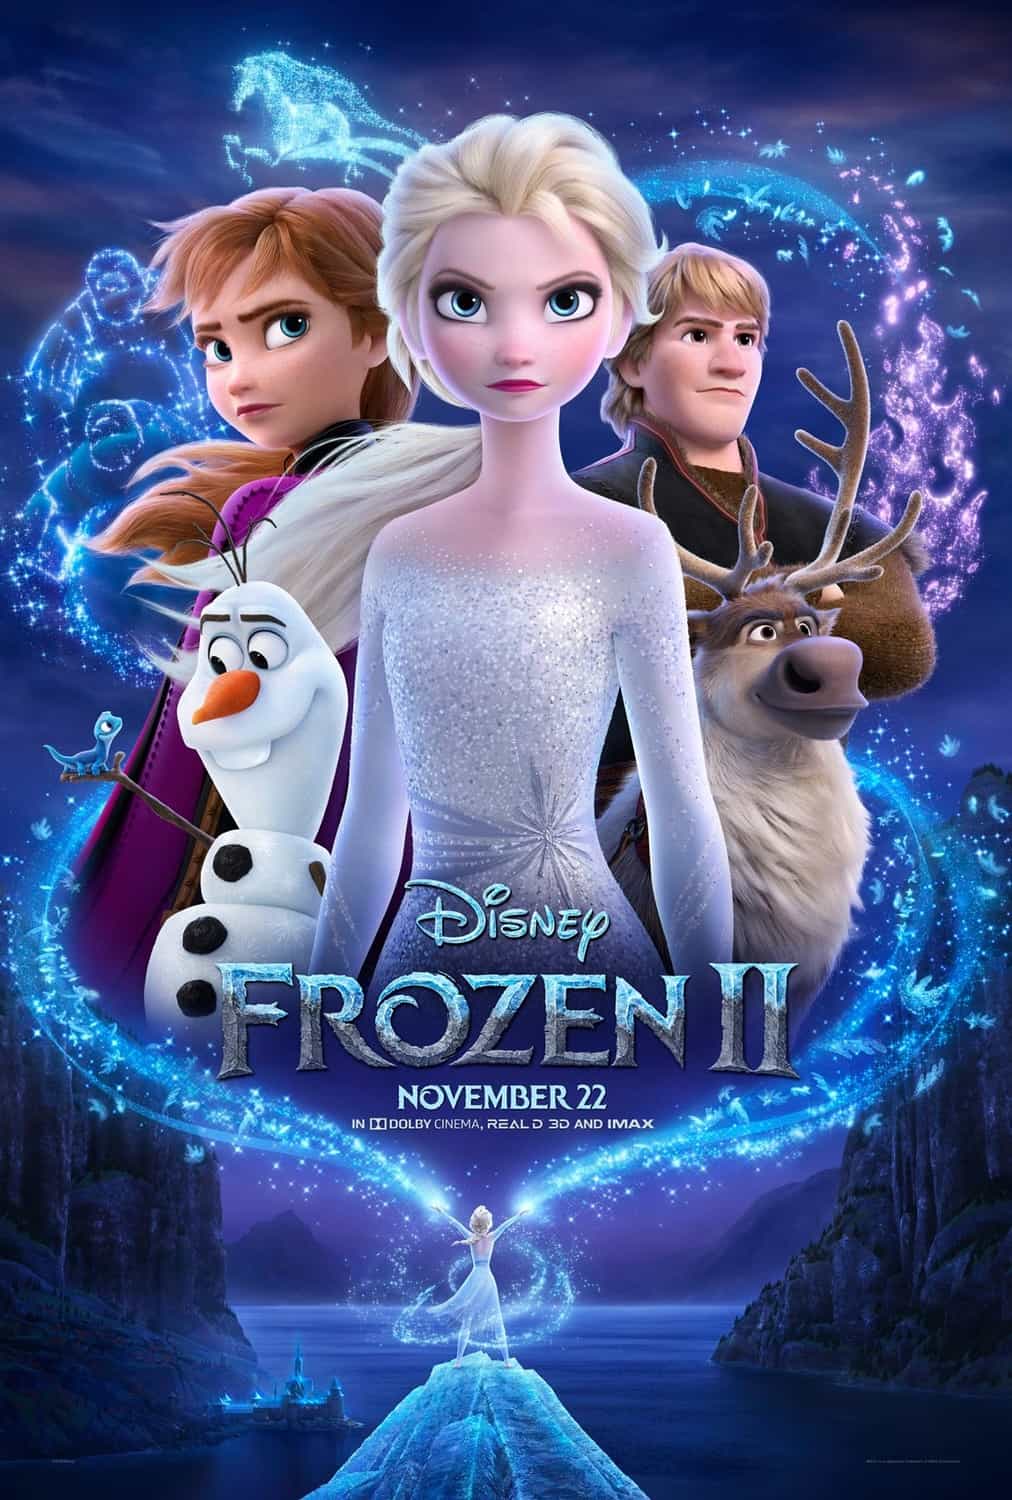 World Box Office Analysis 6th - 8th December 2019:  Frozen II remains at the top while Jumanji makes its debut at number 2